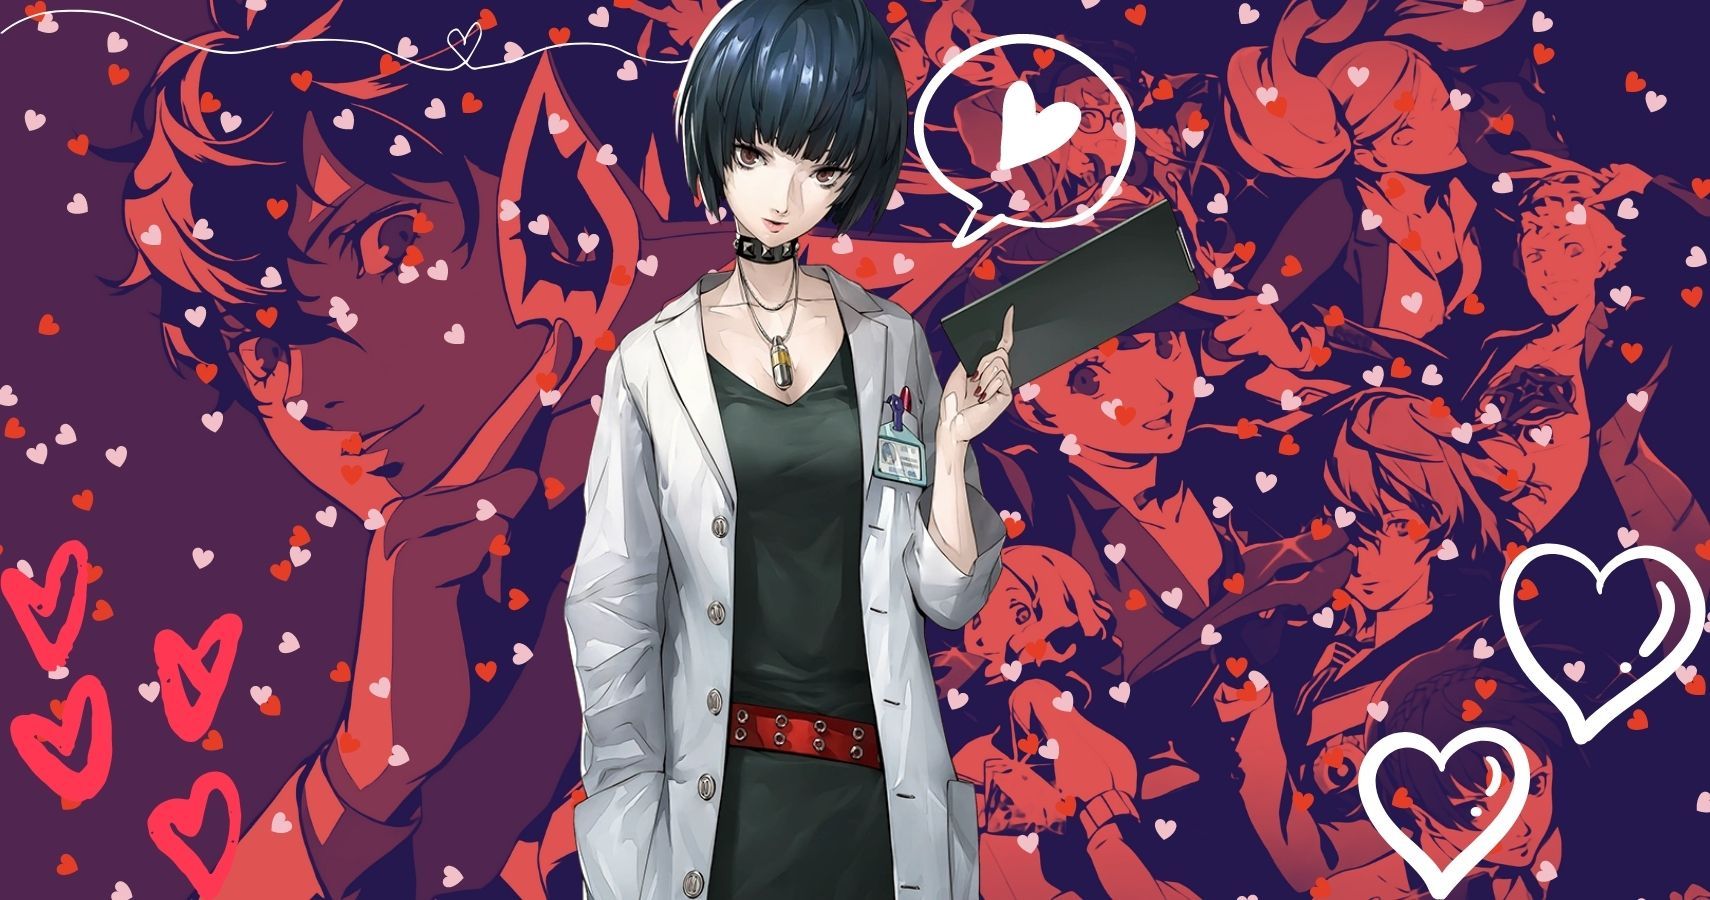 A picture of Tae Takemi standing against a flurry of hearts